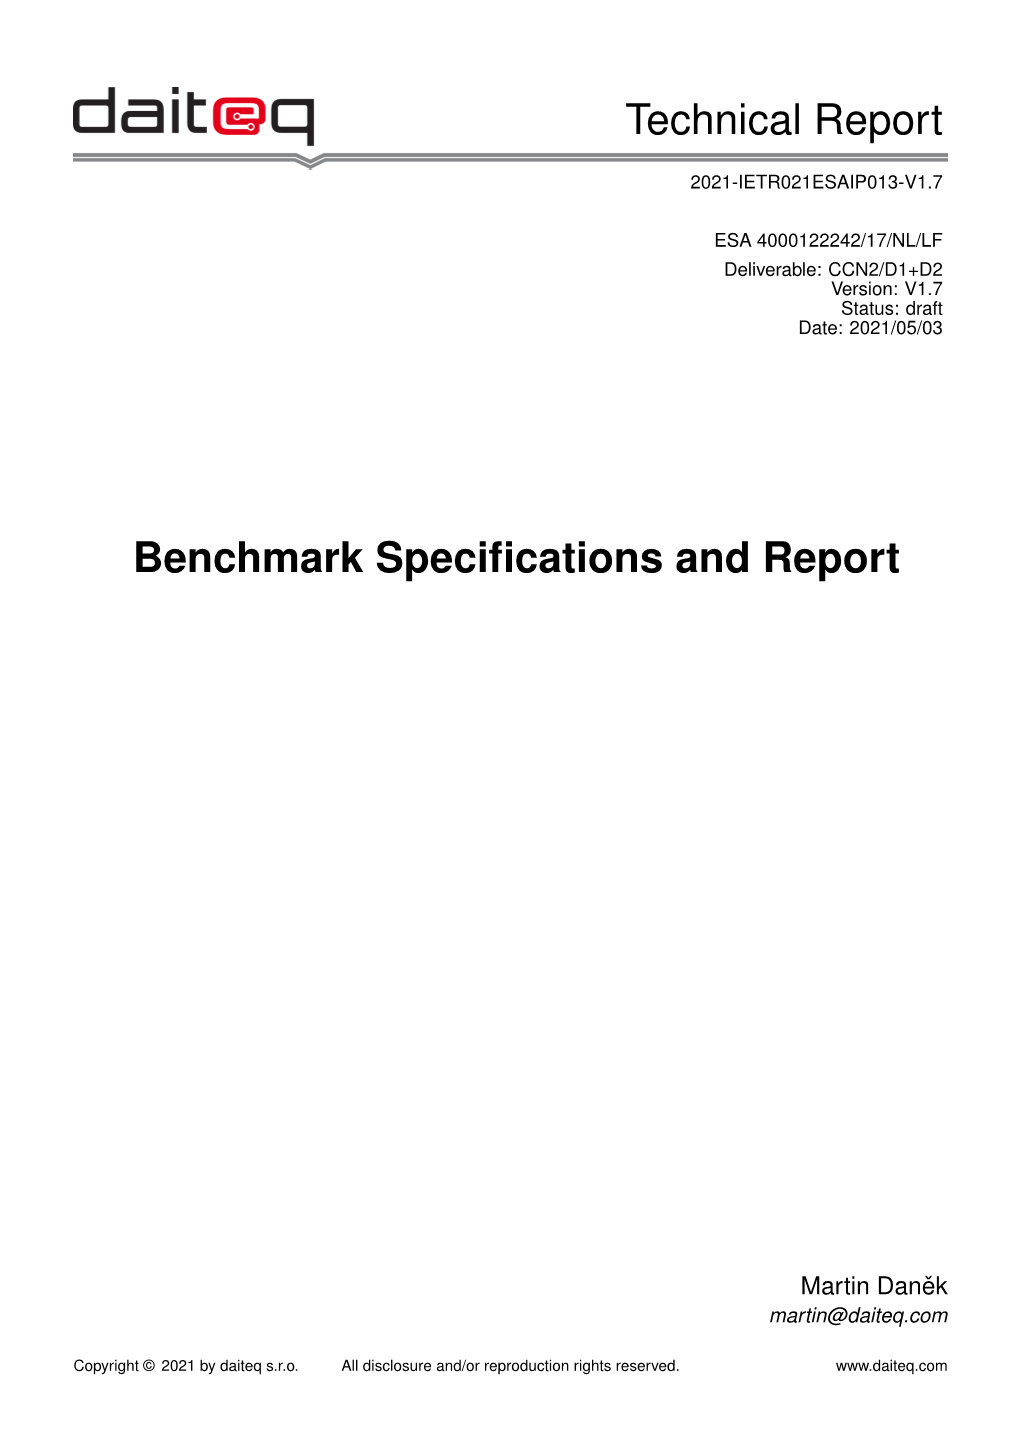 Technical Report Benchmark Specifications and Report